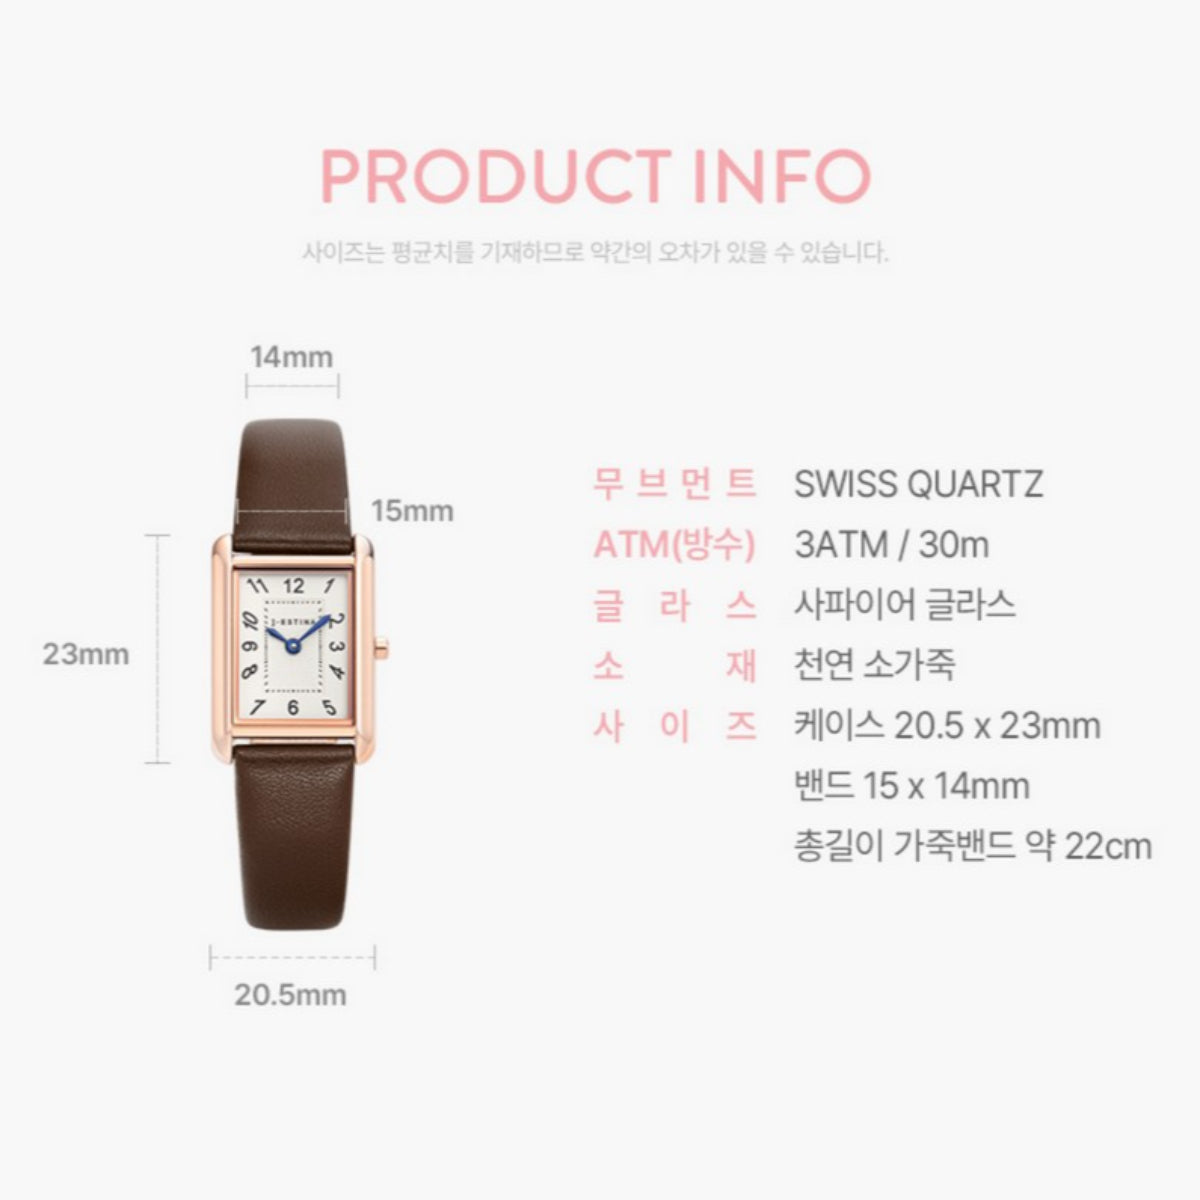 J.ESTINA Nuovo Tempo Leather Watch IU Pick Analog Watch Brown Gold Number Face Made in Korea / from Seoul, Korea